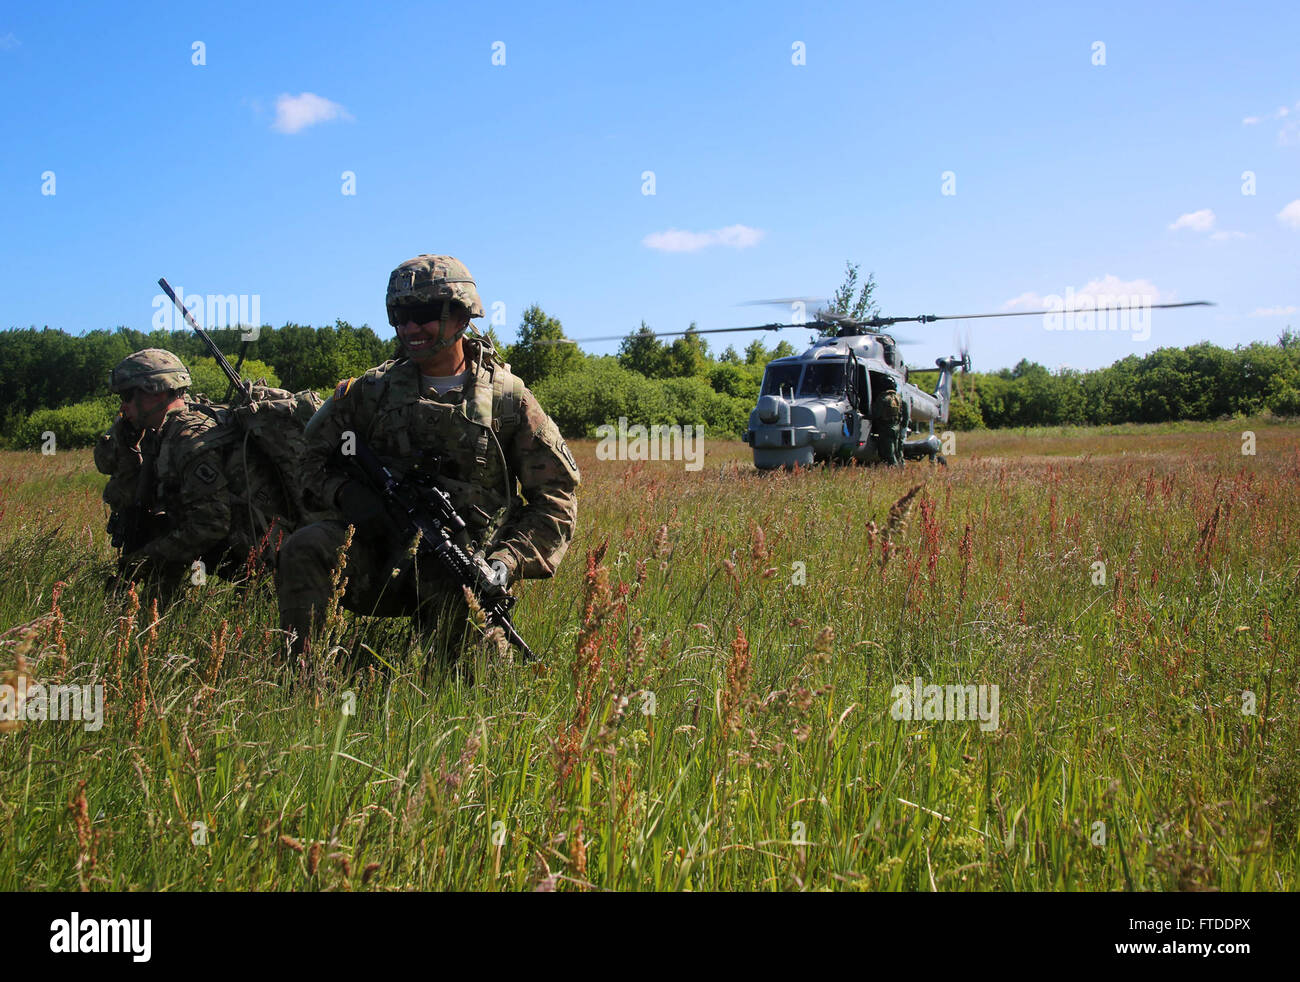 150615-M-OM669-007 POLAND (June 15, 2015) U.S. Army paratroopers from the 173d Airborne Brigade inserted into Poland via a British Royal Navy Lynx Mk-8 and conducted a personnel extraction, June 15. The mission is one of the exercise scenarios for BALTOPS 2015, an annually reoccurring multinational exercise designed to enhance flexibility and interoperability, as well as demonstrate resolve of allied and partner forces to defend the Baltic region. (Official U.S. Marine Corps photo by 1st Lt. Sarah E. Burns/Released) Stock Photo